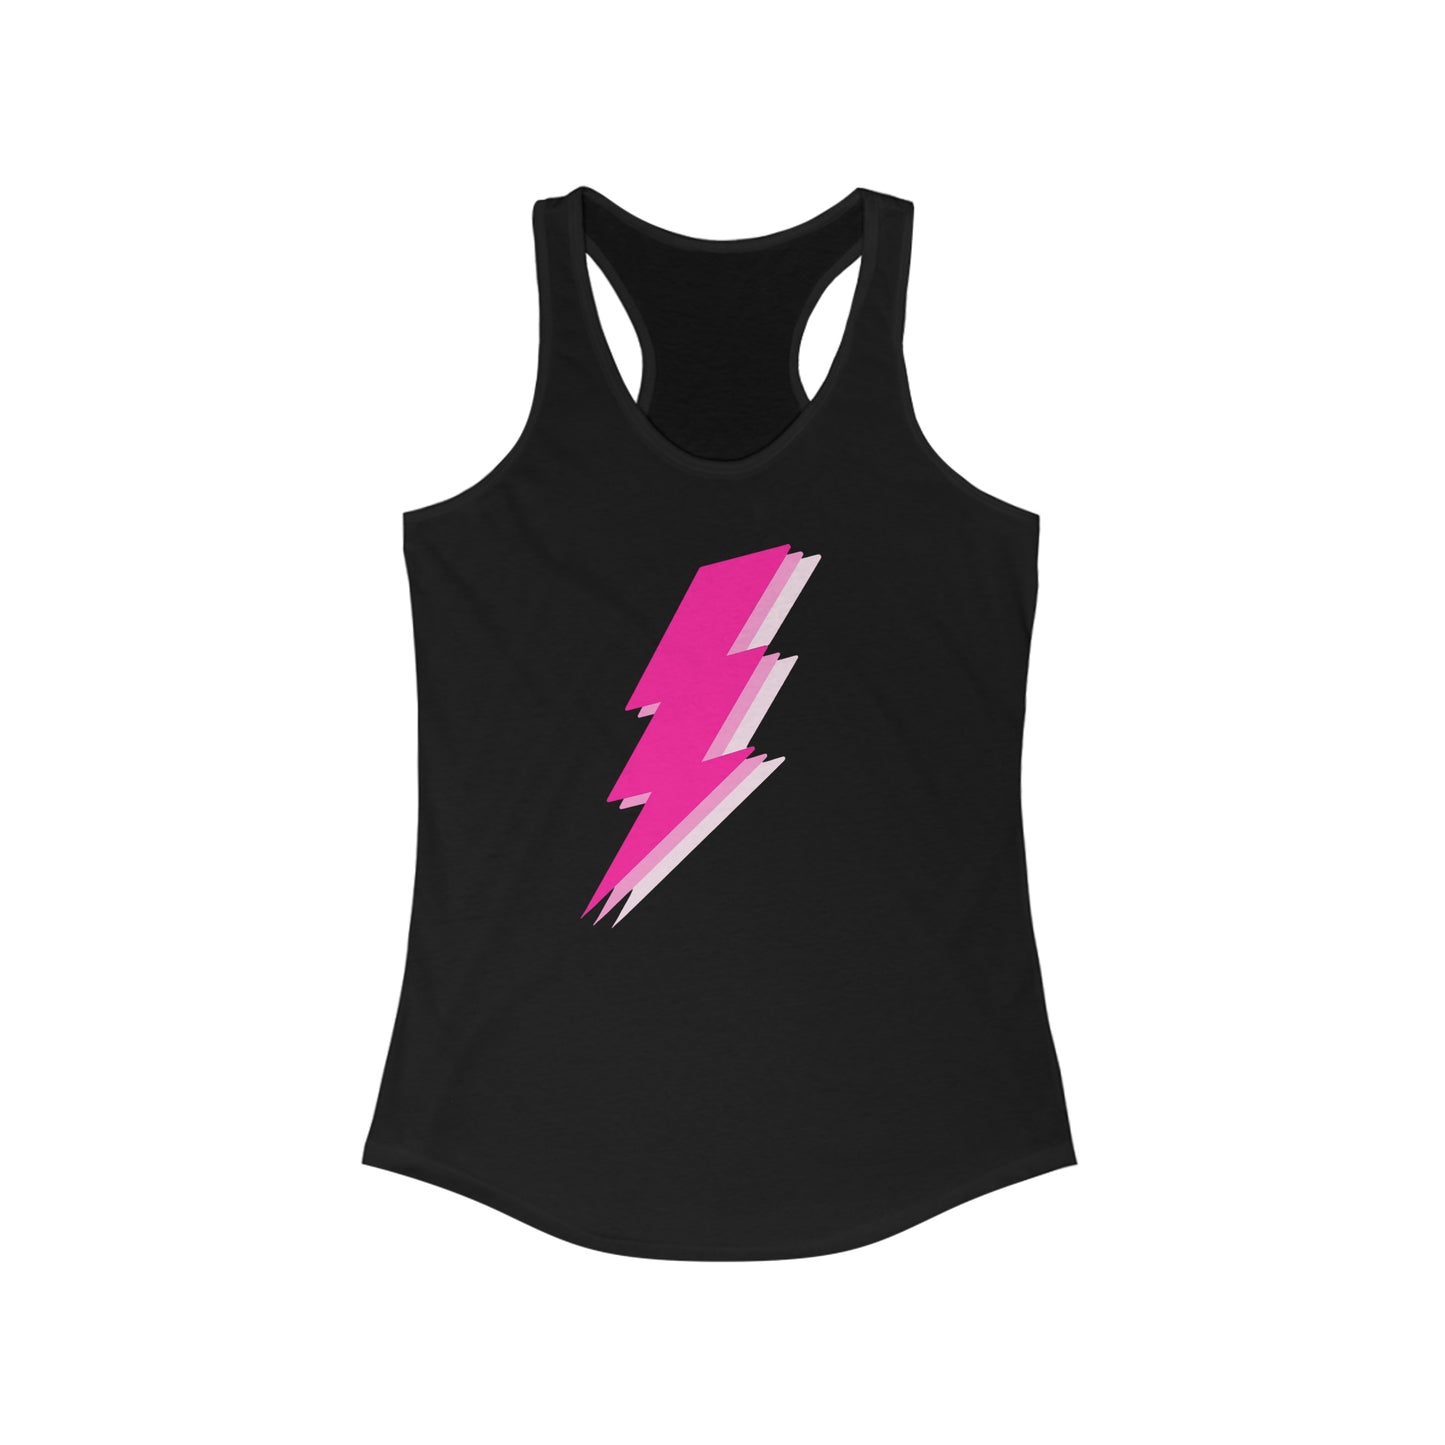 Lightening Racerback Tank Top with High-Quality Print: Lightweight, Comfy, and Stylish | Ideal for Active Lifestyles